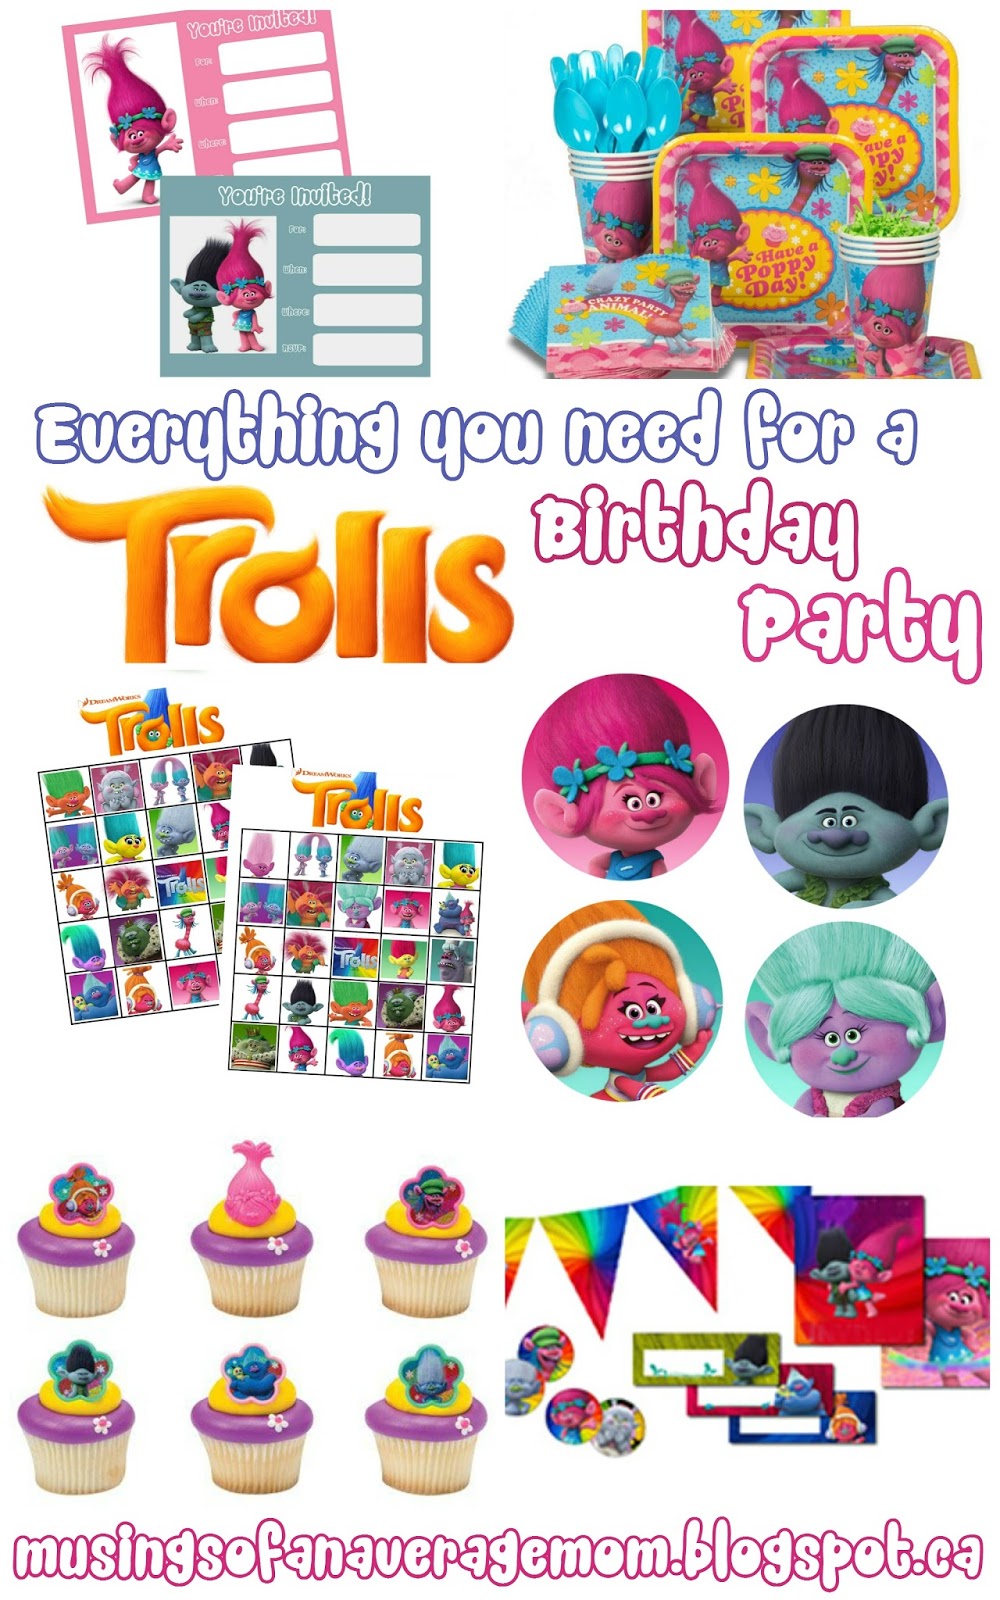 musings-of-an-average-mom-everything-you-need-for-a-trolls-party